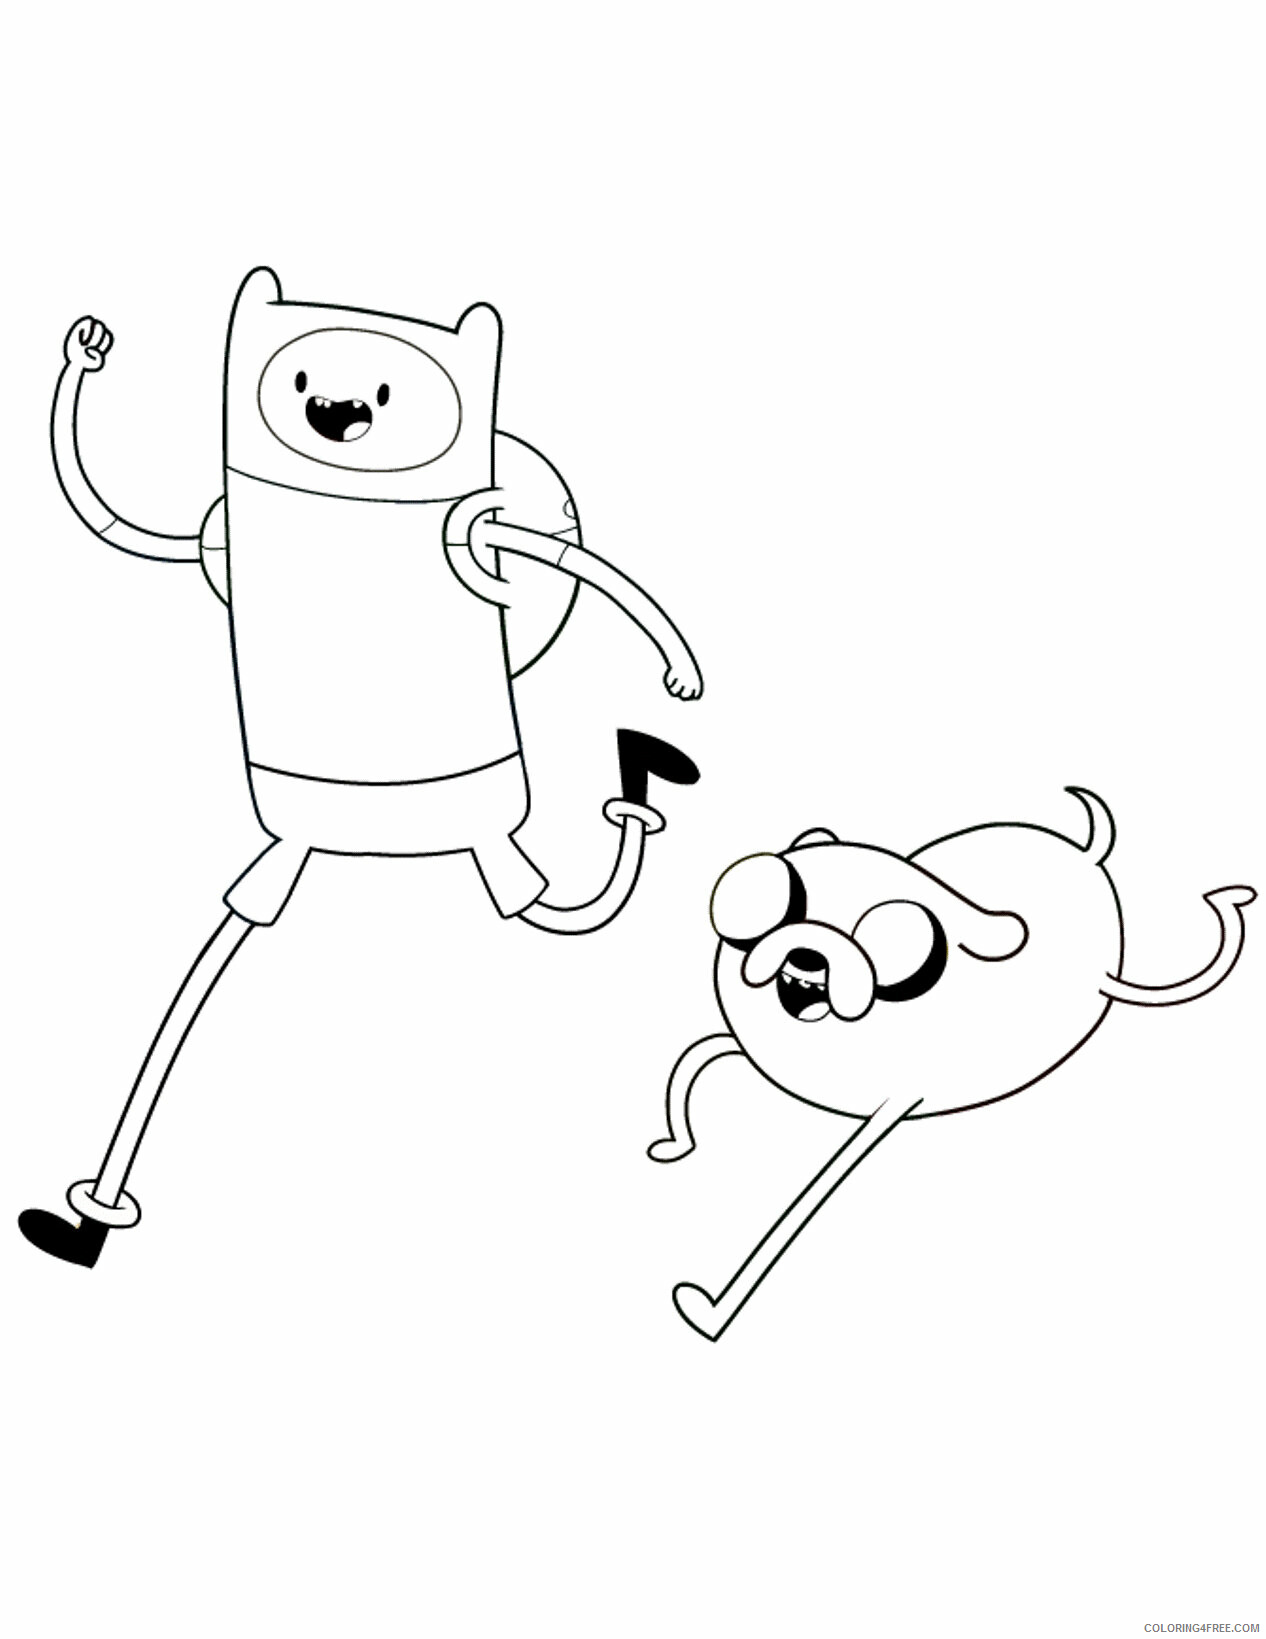 Adventure Time Coloring Pages Online Printable Sheets Adventure Time Finn 2021 a 2640 Coloring4free